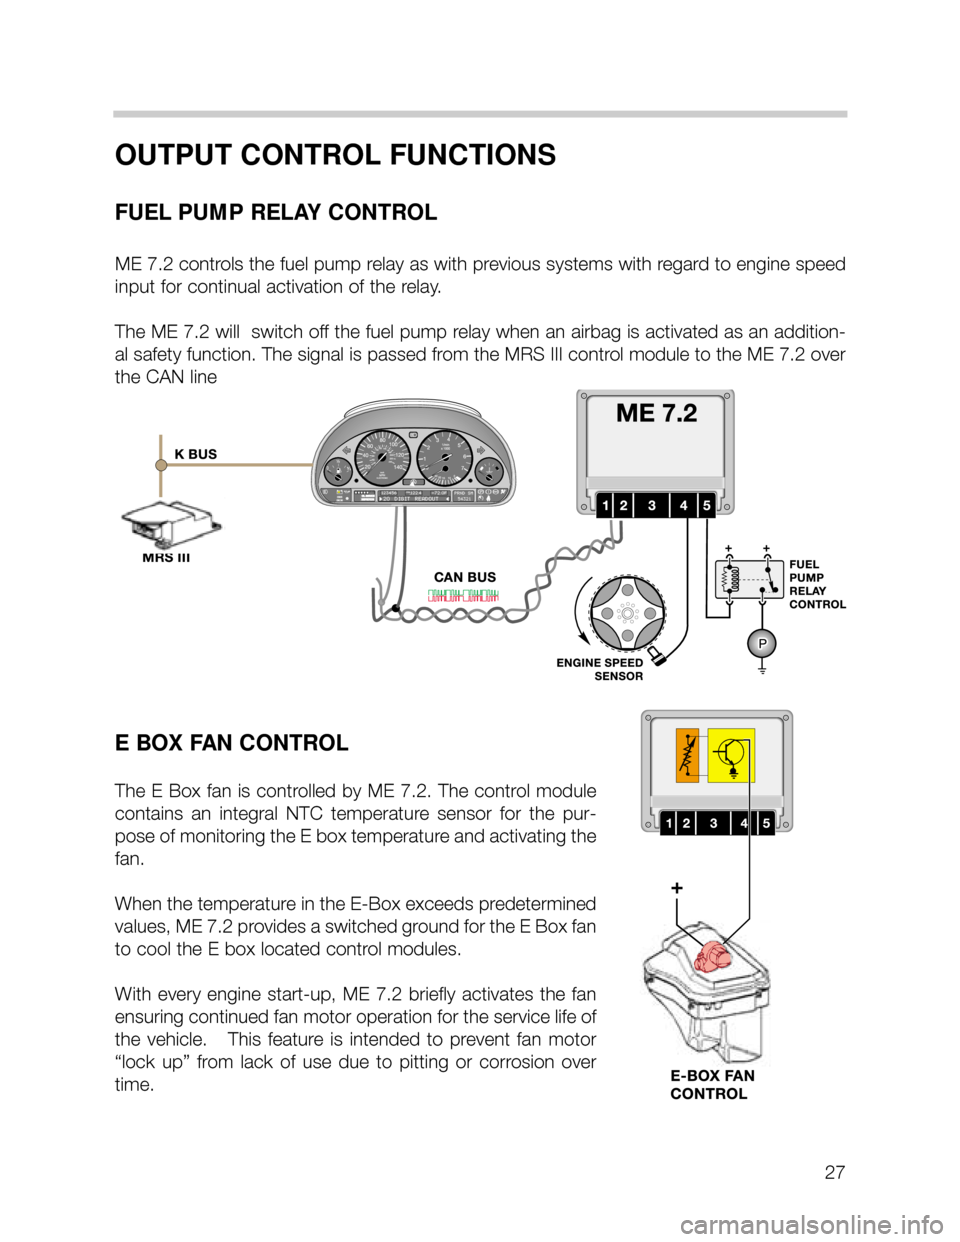 BMW X5 1999 E53 M62TU Engine Workshop Manual 27
OUTPUT CONTROL FUNCTIONS
FUEL PUMP RELAY CONTROL
ME 7.2 controls the fuel pump relay as with previous systems with regard to engine speed
input for continual activation of the relay.  
The ME 7.2 w